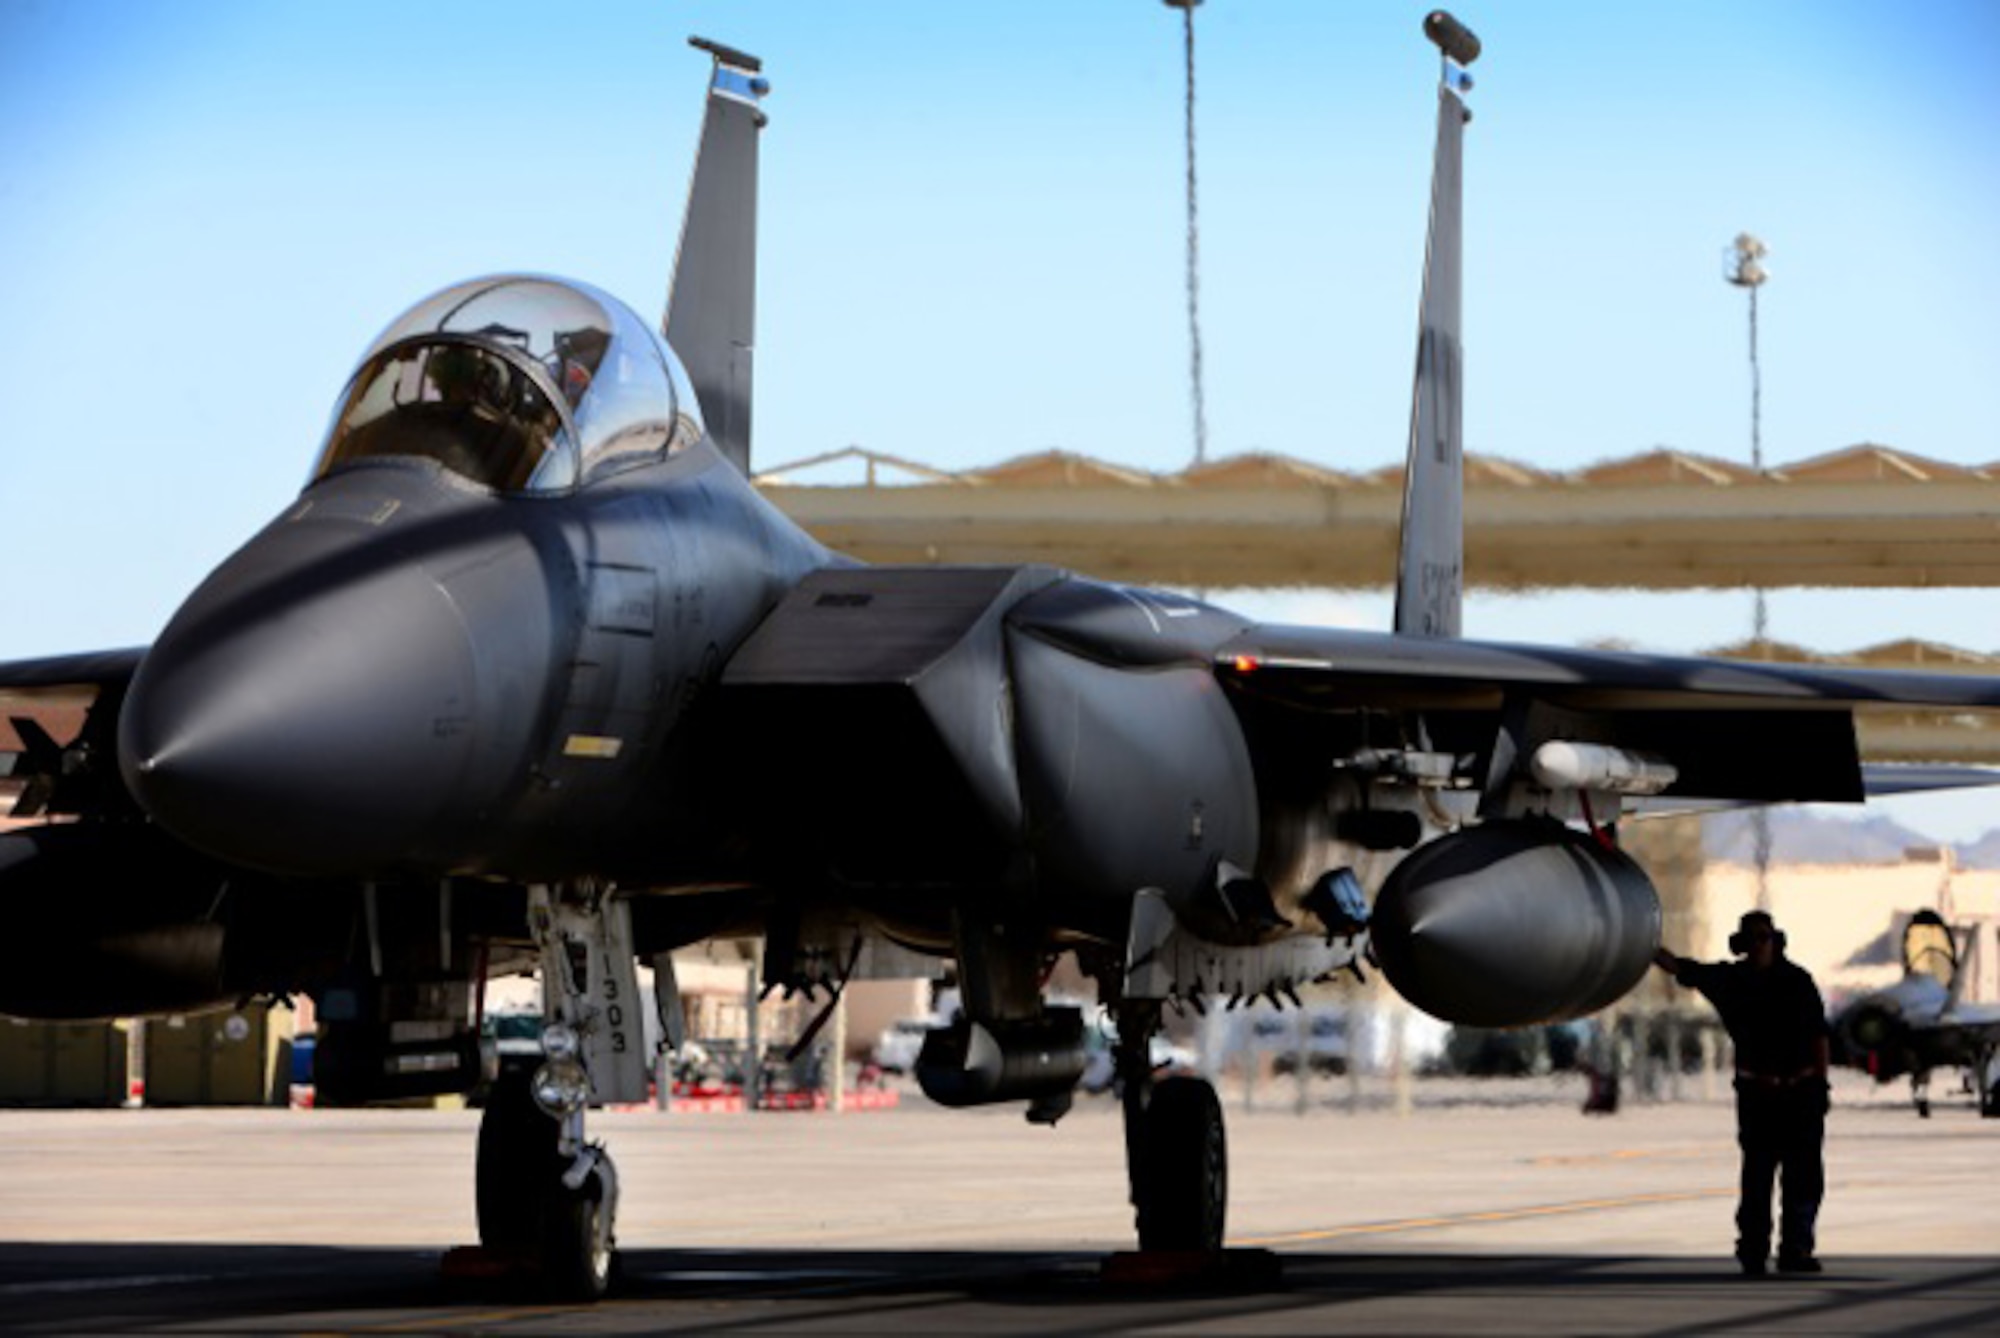 An F-15E Strike Eagle from the 492nd Fighter Squadron awaits clearance to taxi for a sortie in preparation for exercise Red Flag 16-4 at Nellis Air Force Base, Nevada, Aug 12. Red Flag is the U.S. Air Force’s premier air-to-air combat training exercise and one of a series of advanced training programs that is administered by the U.S. Air Force Warfare Center and executed through the 414th Combat Training Squadron. (U.S. Air Force photo/ Tech. Sgt. Matthew Plew)